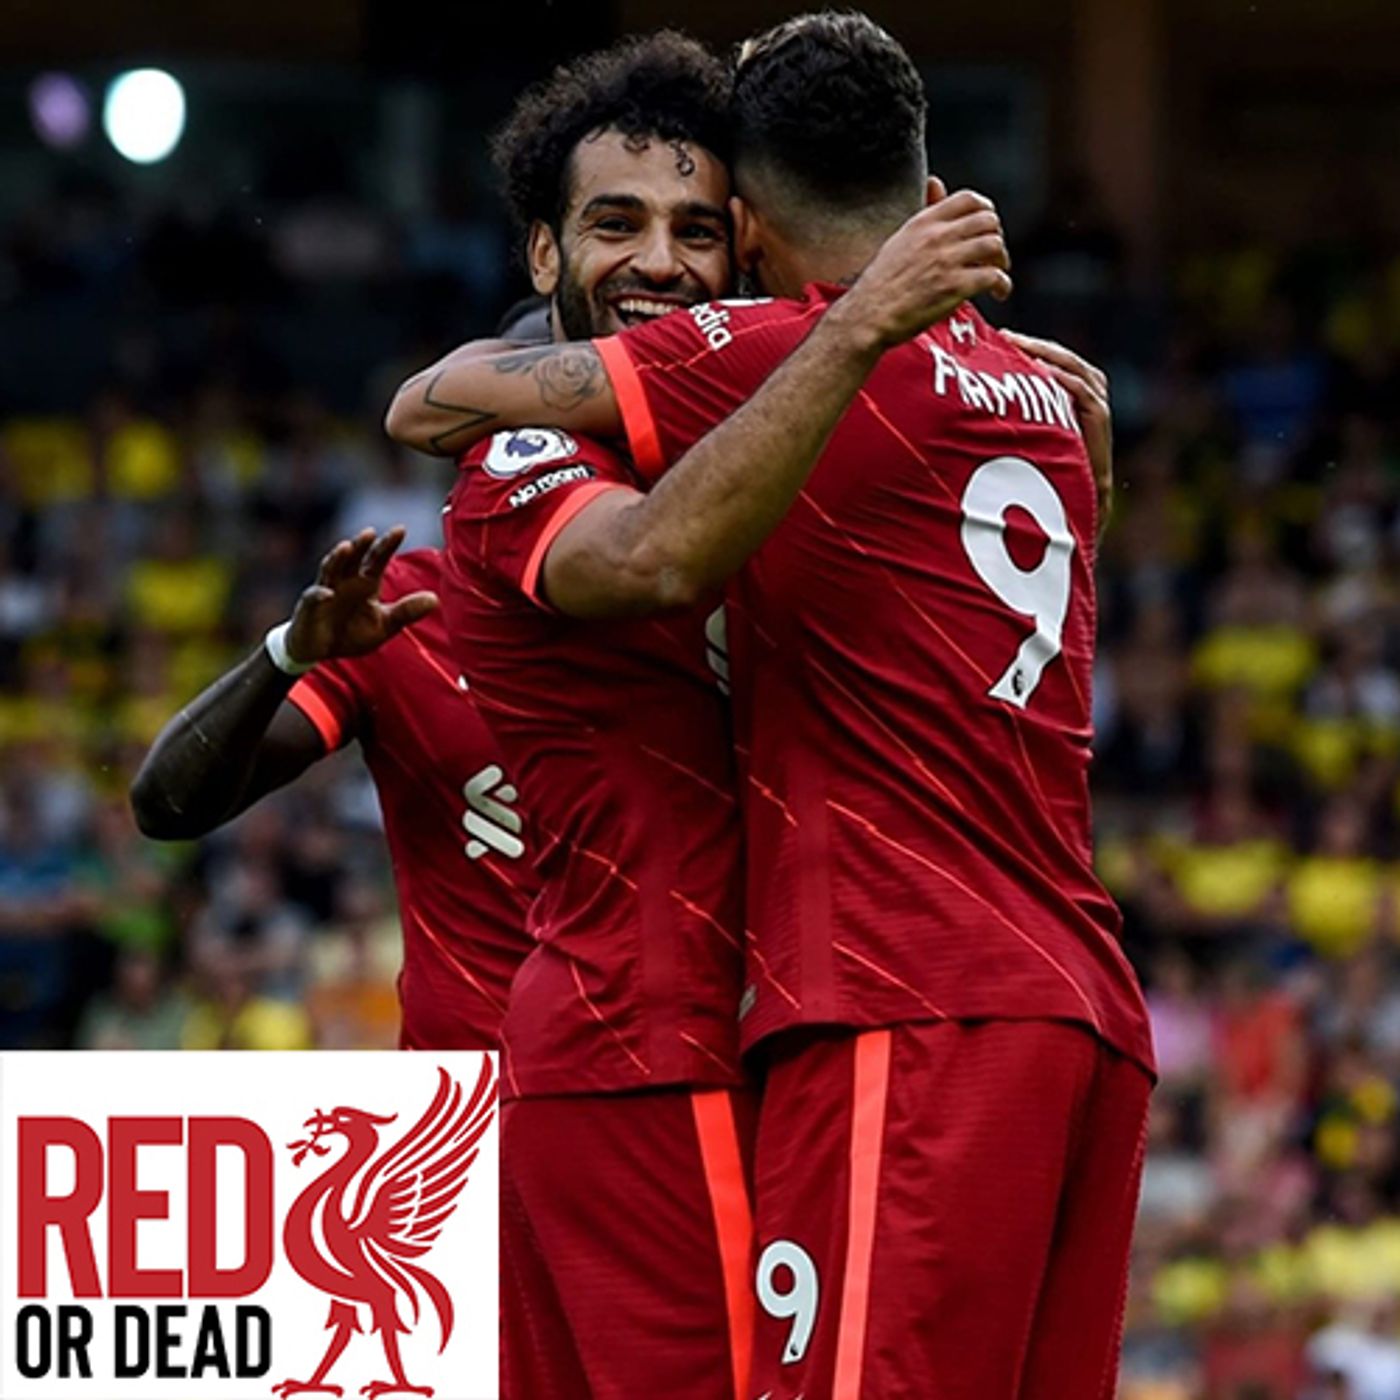 S1 Ep44: The Red Or Dead Podcast - Episode 44